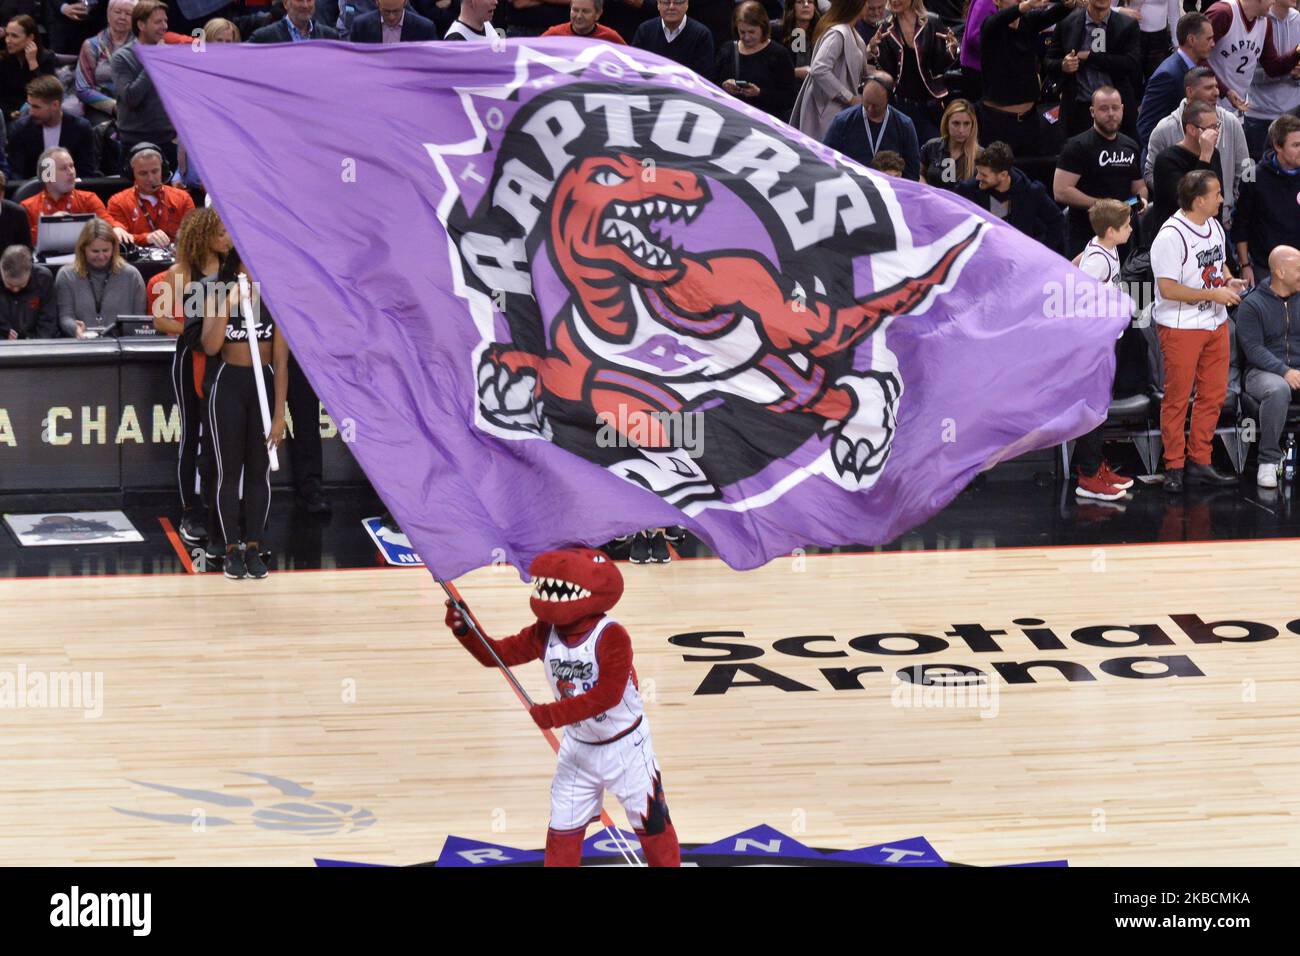 Toronto Raptors team mascot with a flag that depicts the old team logo during the Toronto Raptors vs Los Angeles Clippers NBA regular season game at Scotiabank Arena on December 11, 2019, in Toronto, Canada (Score after first half 46:64) (Photo by Anatoliy Cherkasov/NurPhoto) Stock Photo